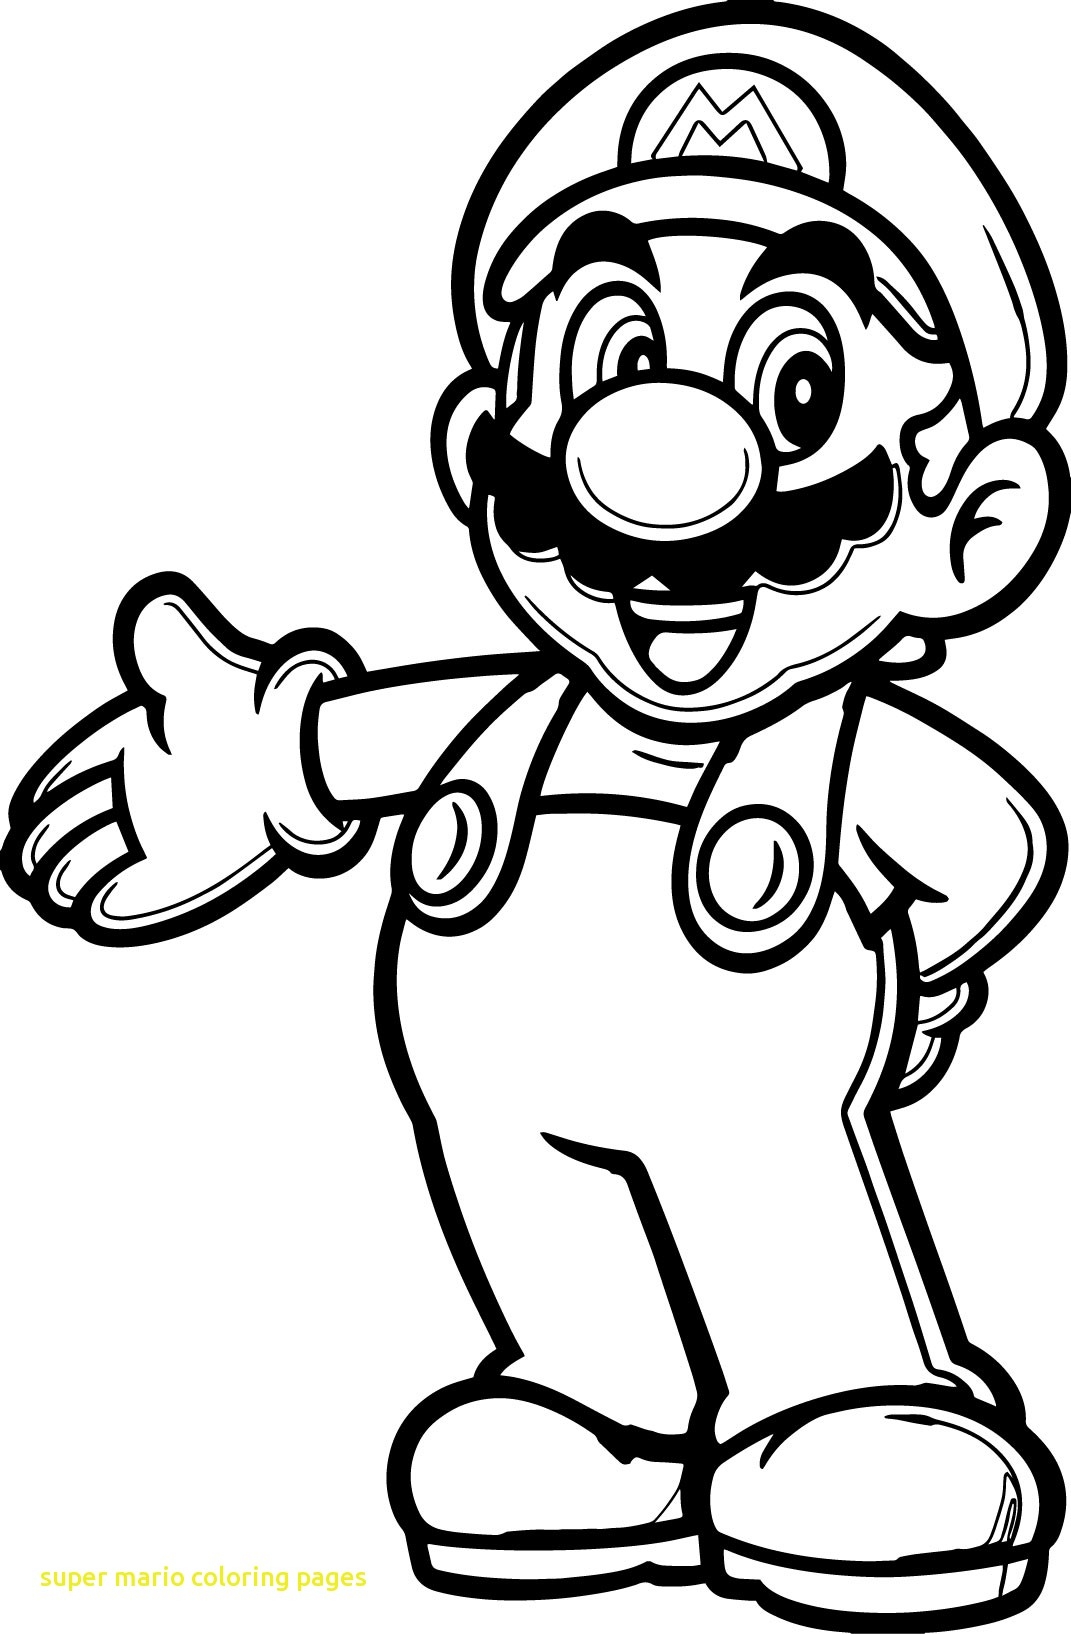 Super Mario Brothers Coloring Pages at GetDrawings | Free download